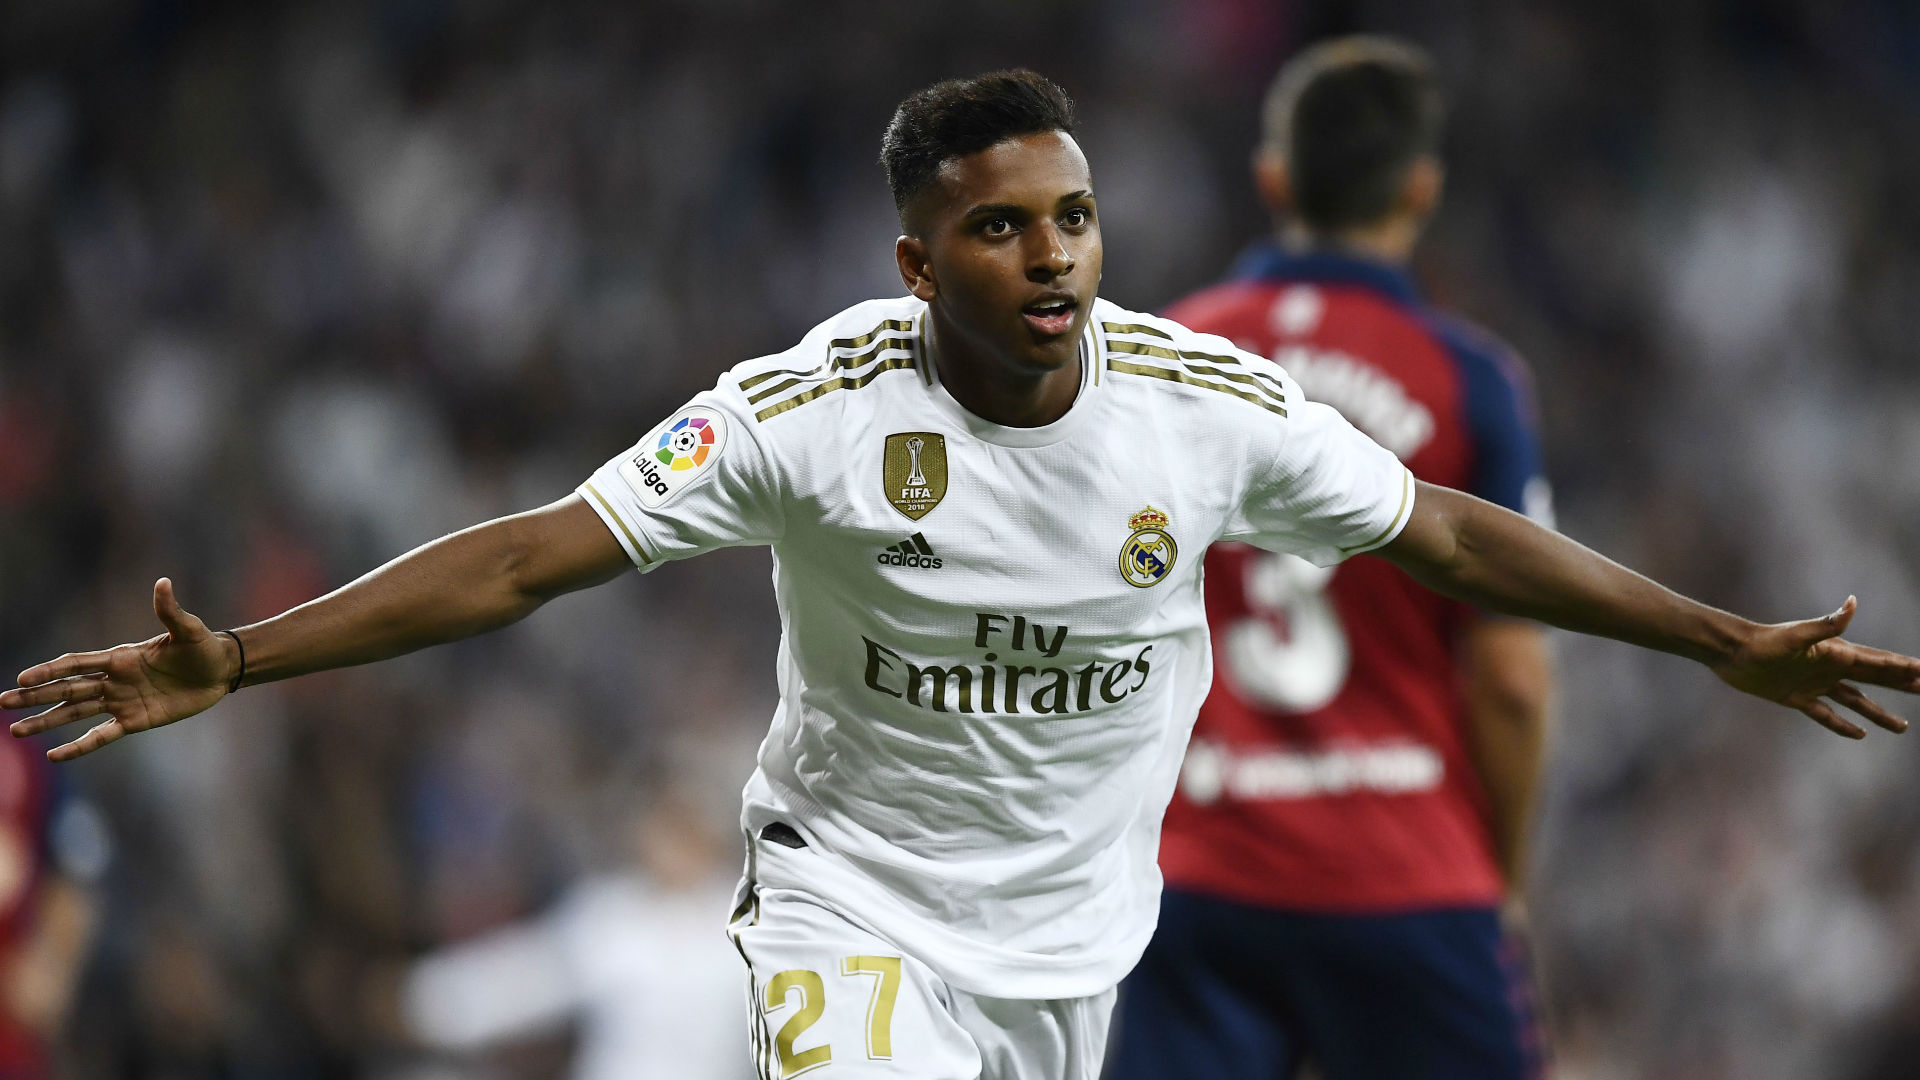 Real Madrid news: Rodrygo nearly equals Ronaldo record with debut goal ...